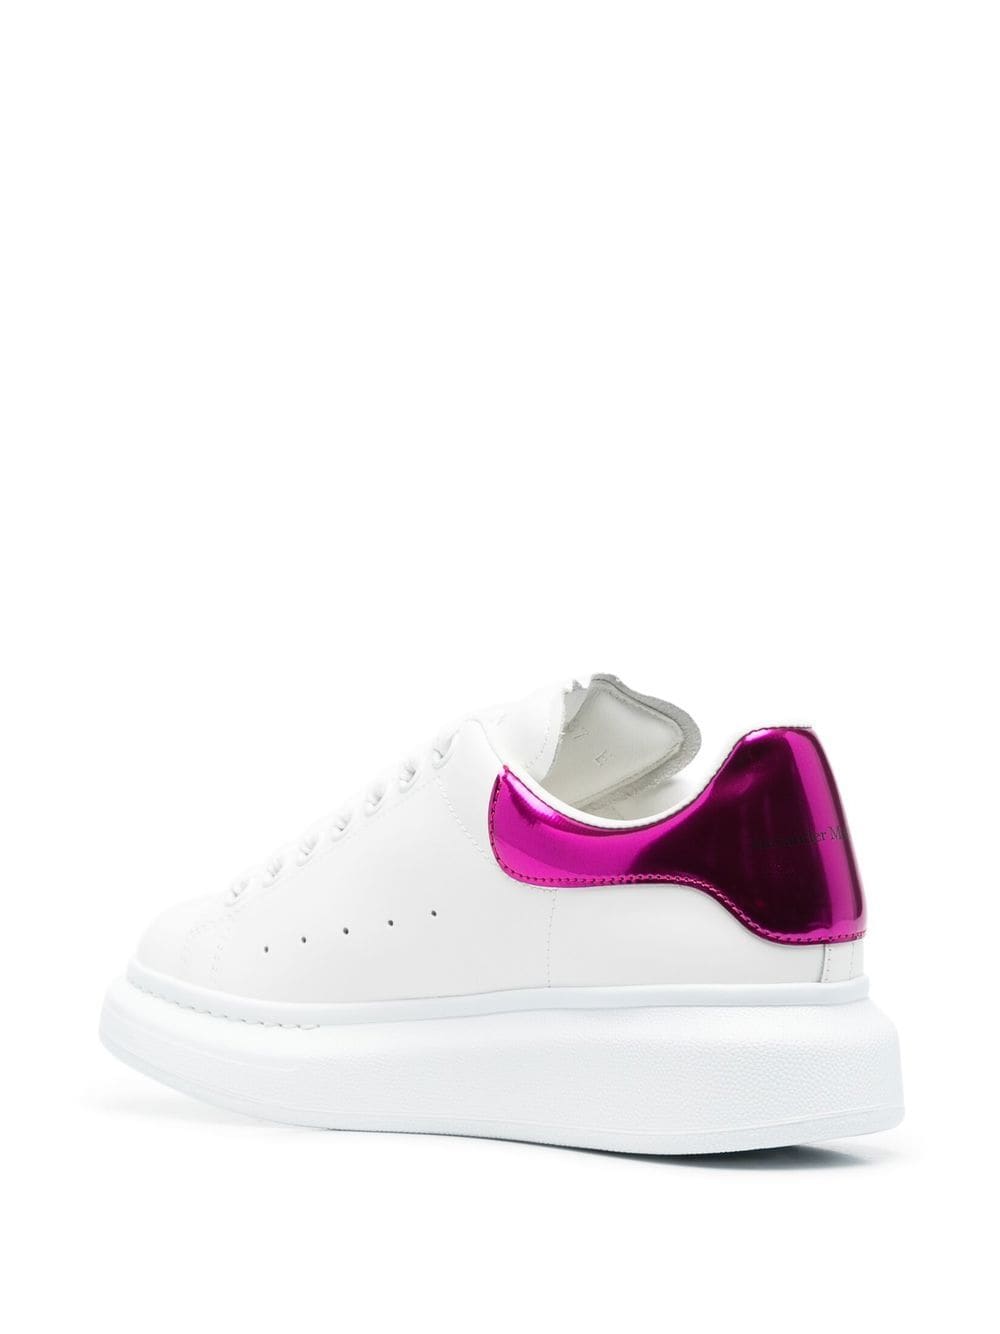 White/purple leather/suede oversized low-top sneakers